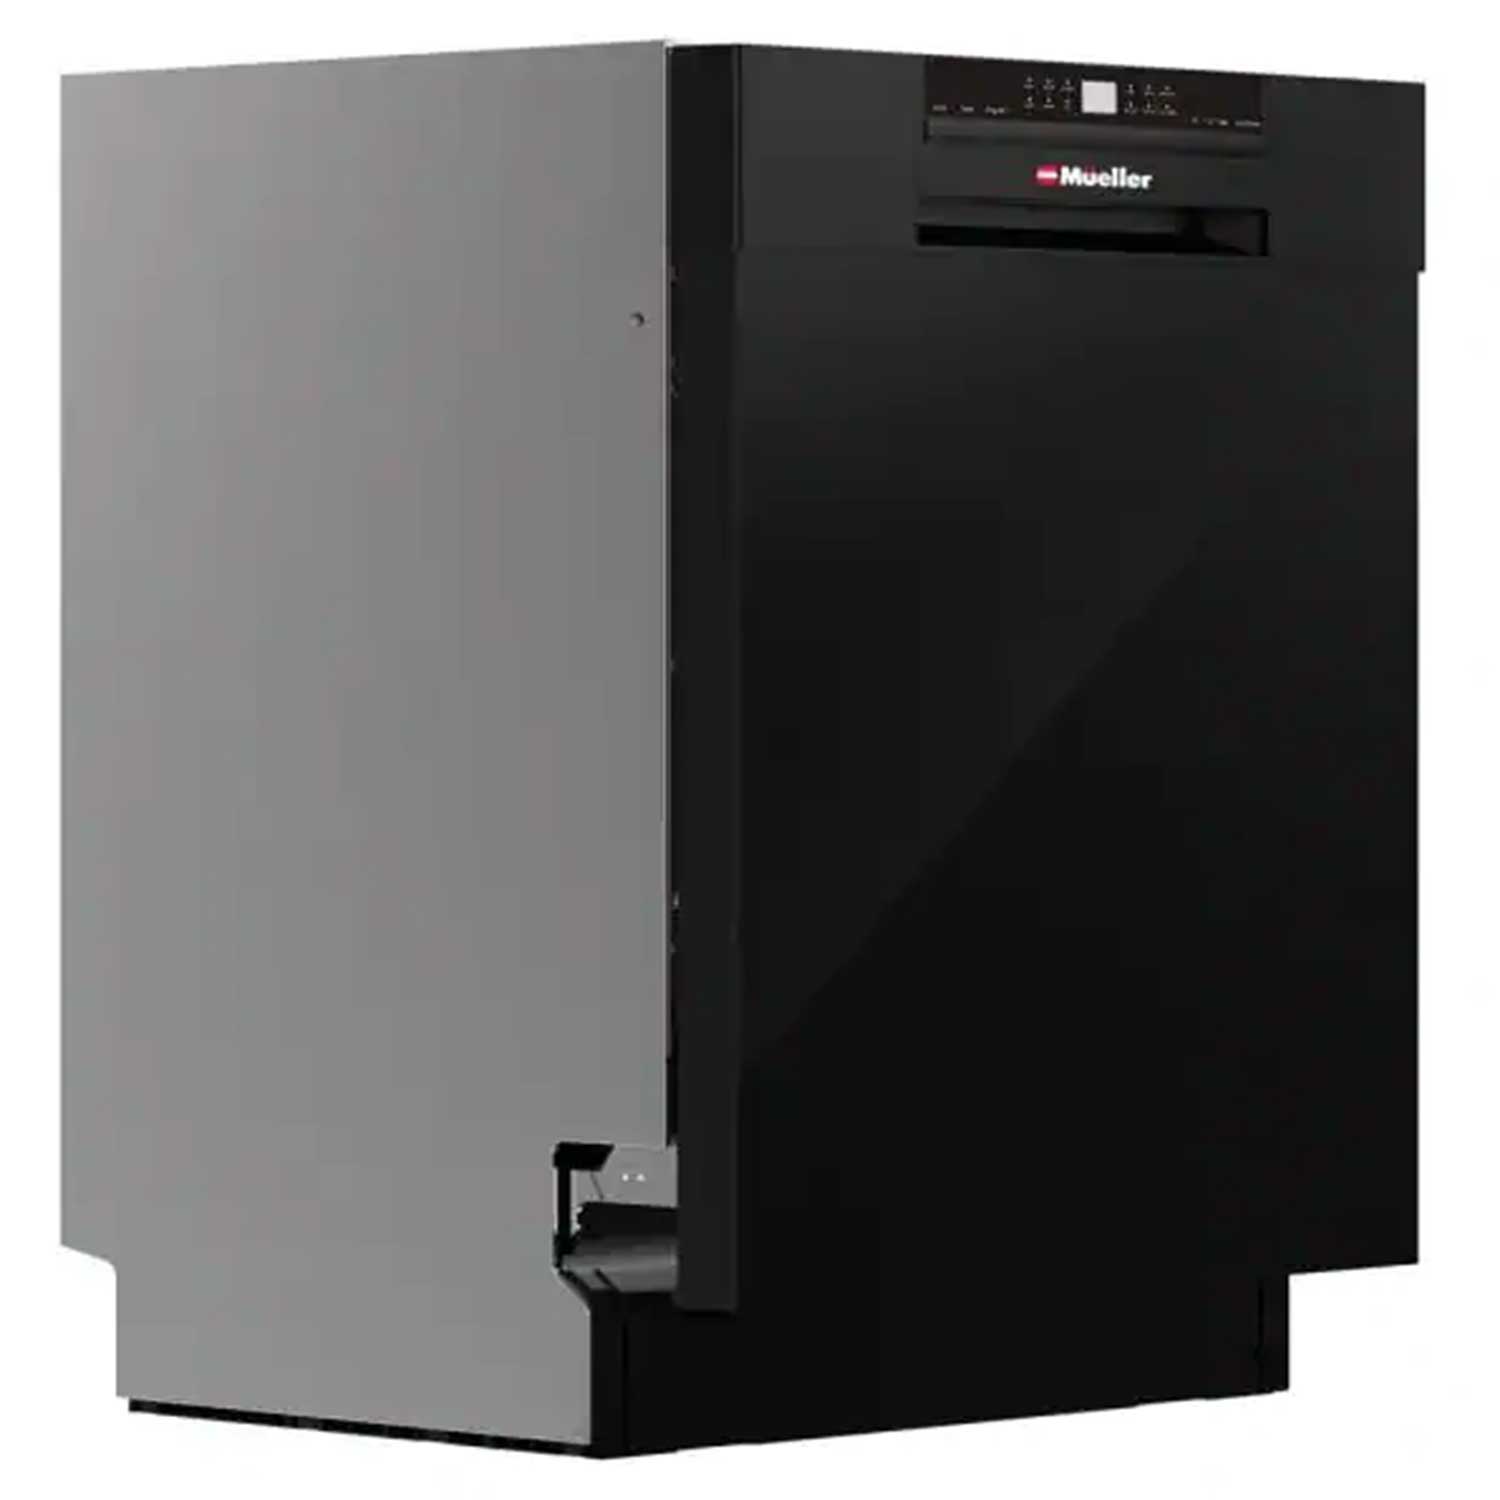 Professional Series 24 Built-In Dishwasher 